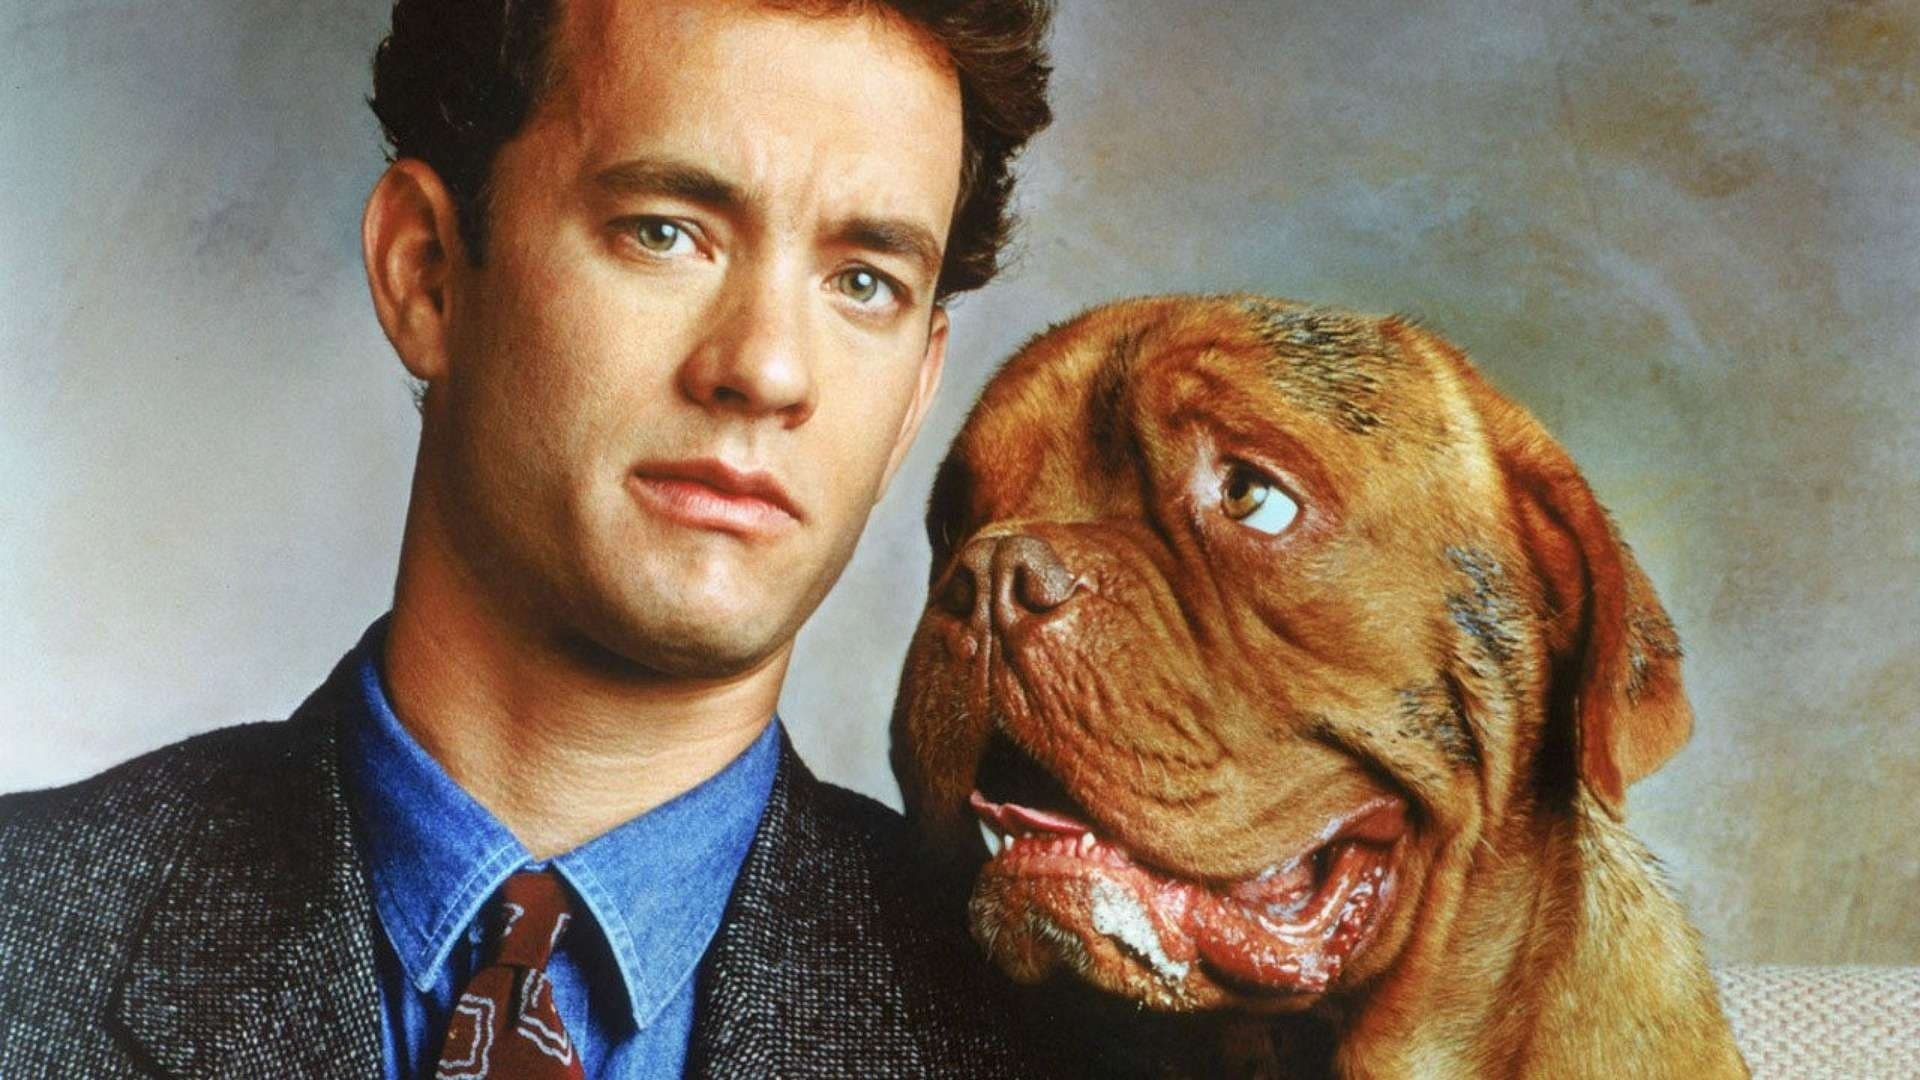 Turner and Hooch: An obsessively neat police detective, acquires a large and slobbery Dogue de Bordeaux. 1920x1080 Full HD Wallpaper.